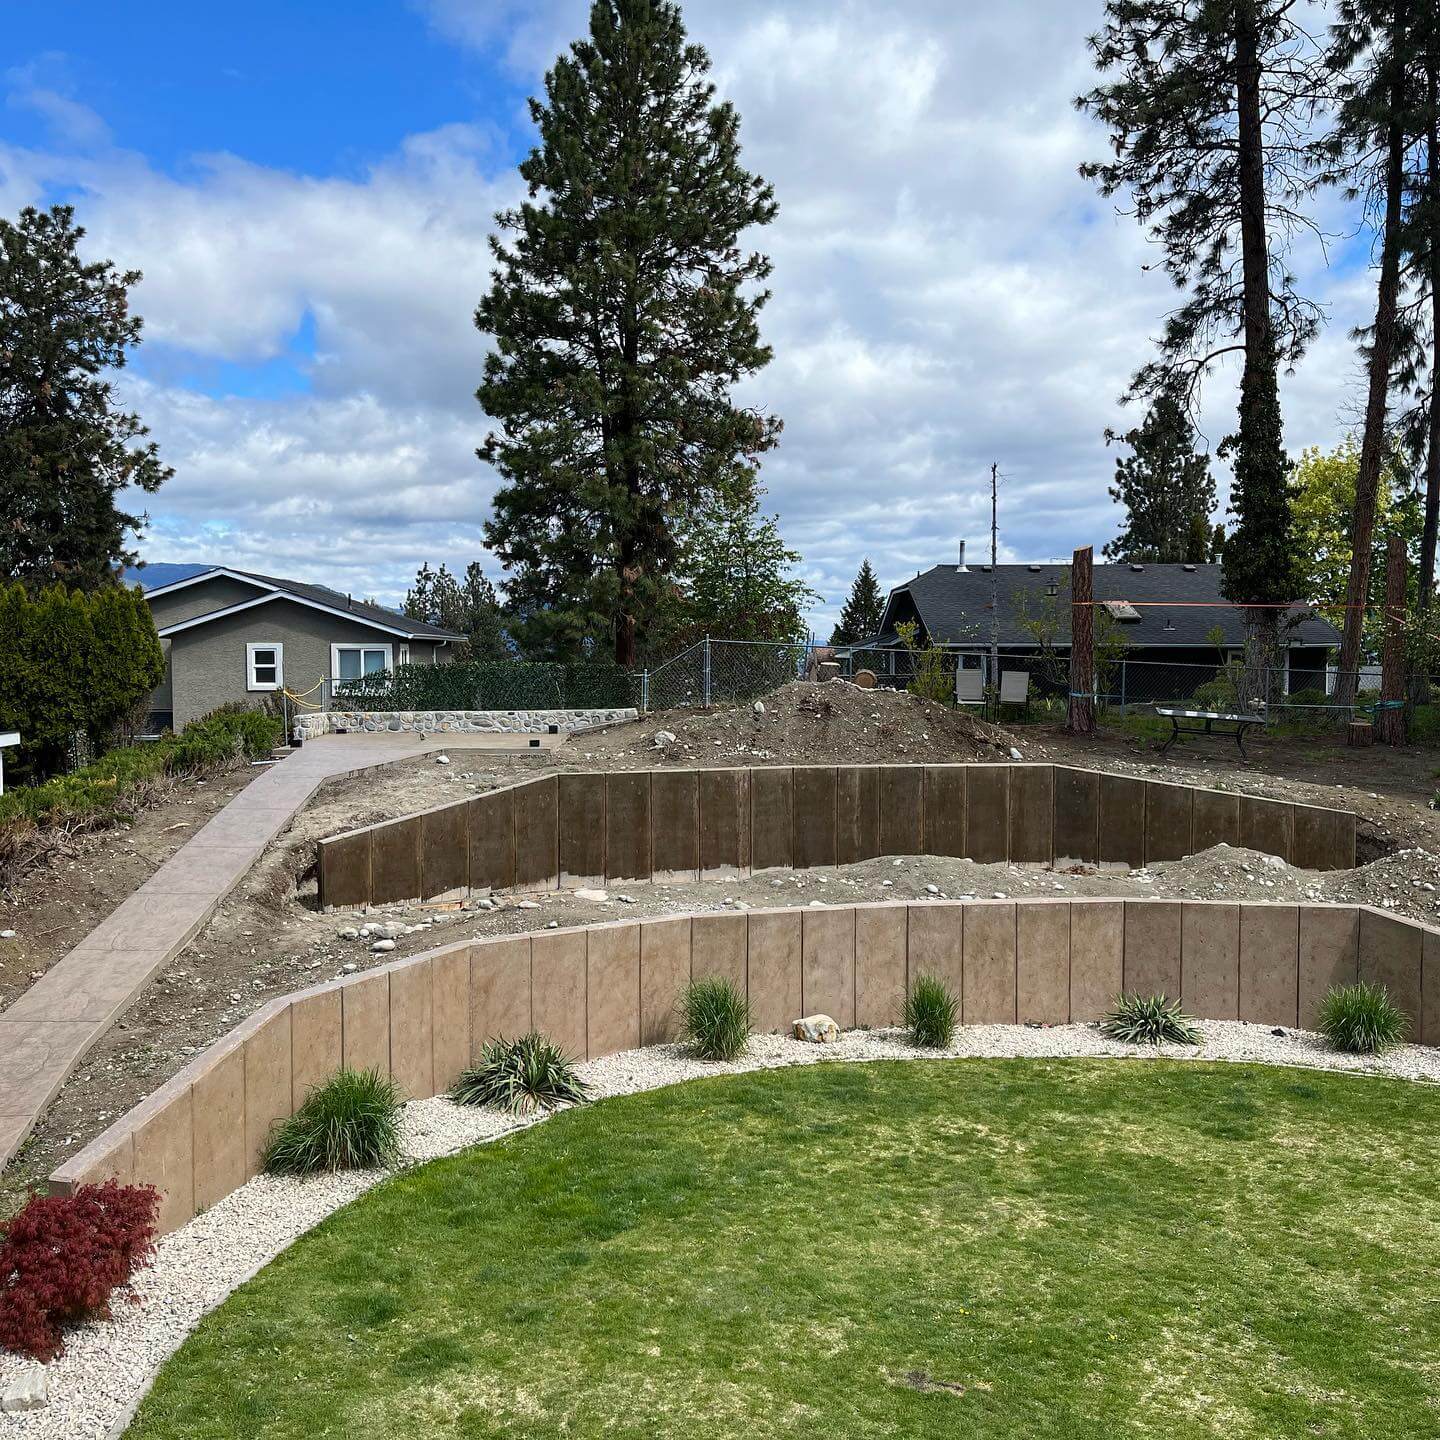 Retaining wall made with exposed aggregate concrete finish